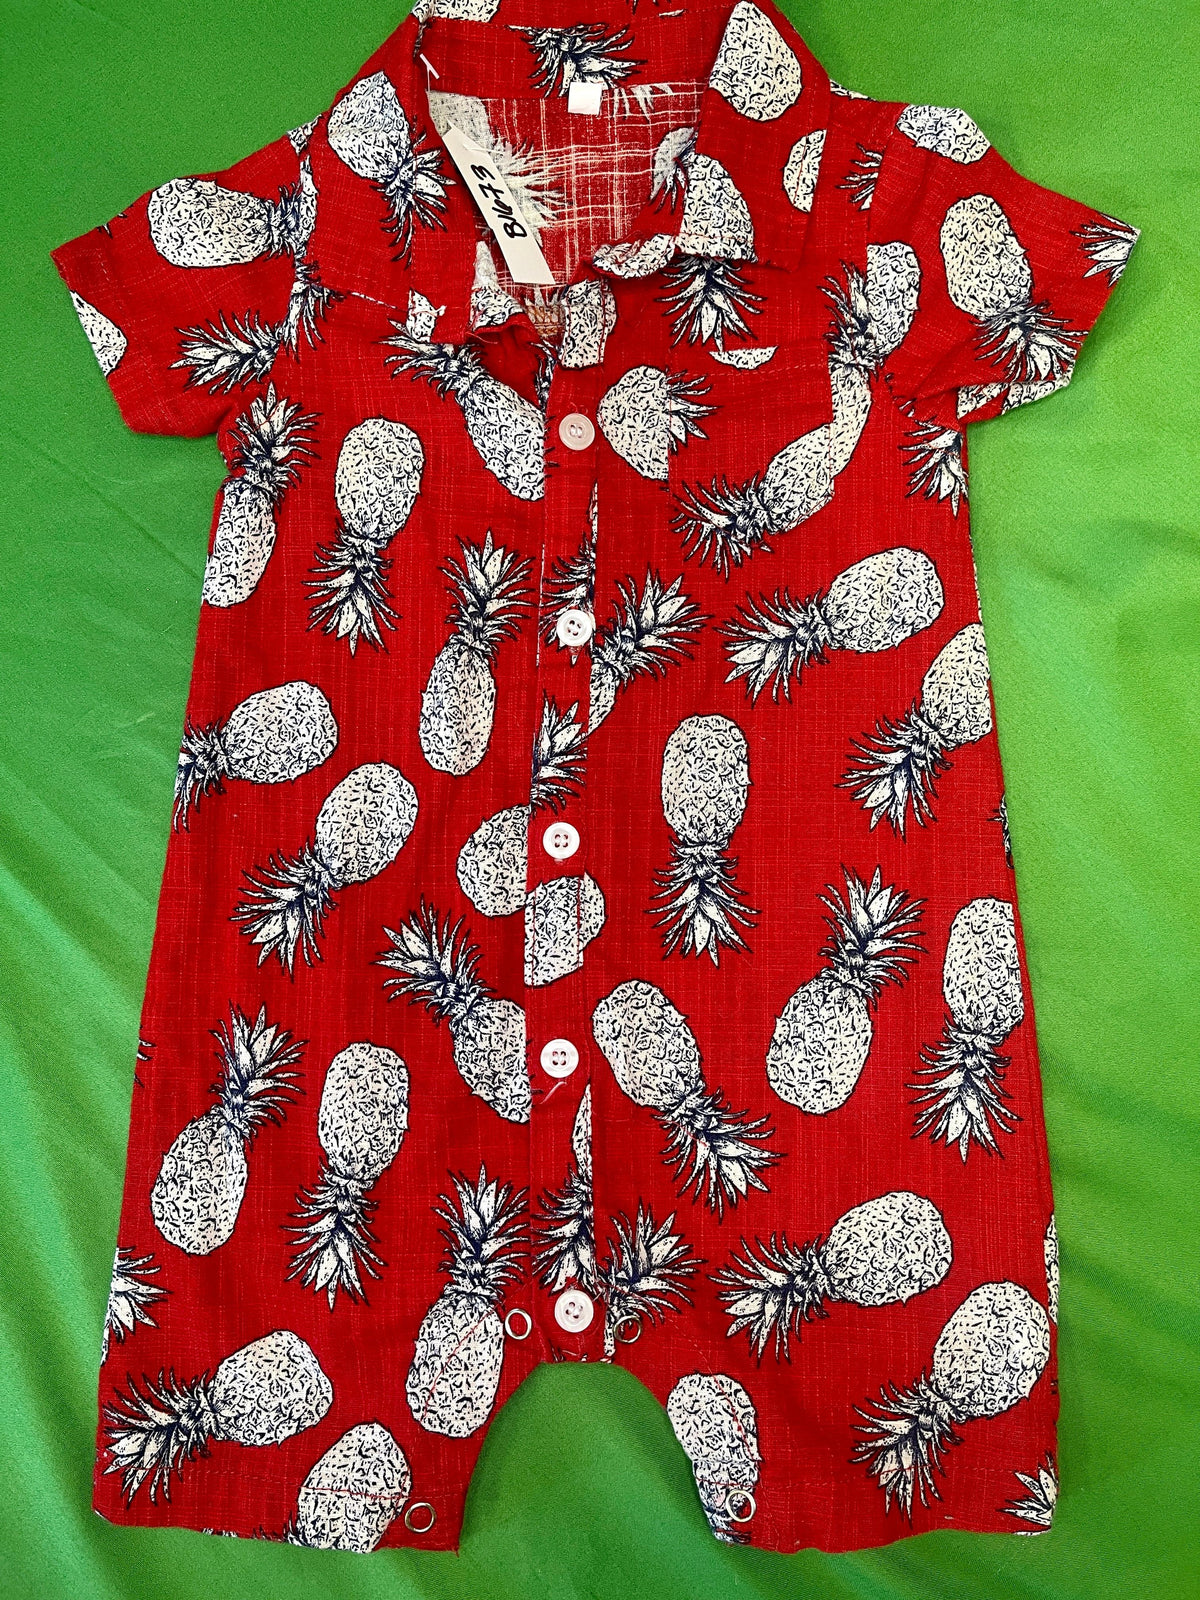 Hawaiian Baby Outfit Red Pineapples Size 70 Infant 6-12 months